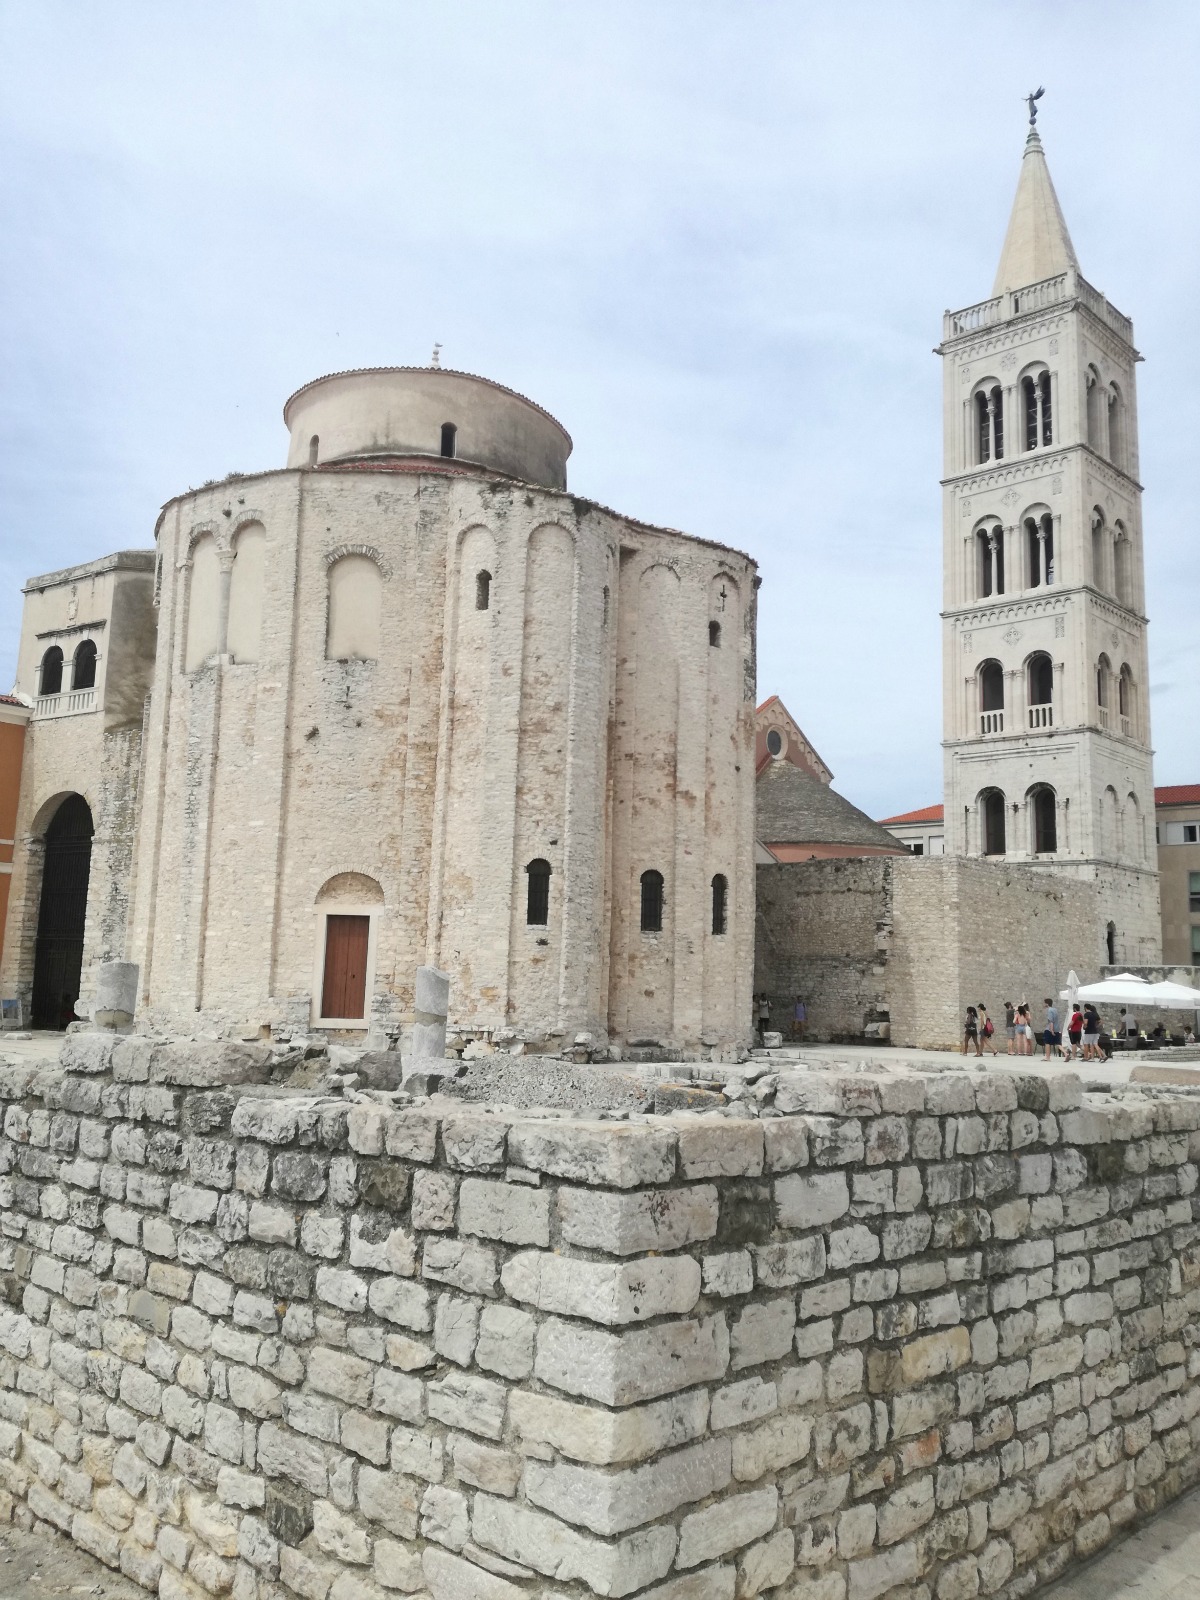 Easy Zadar travel guide for cruisers who want to maximize their time in port